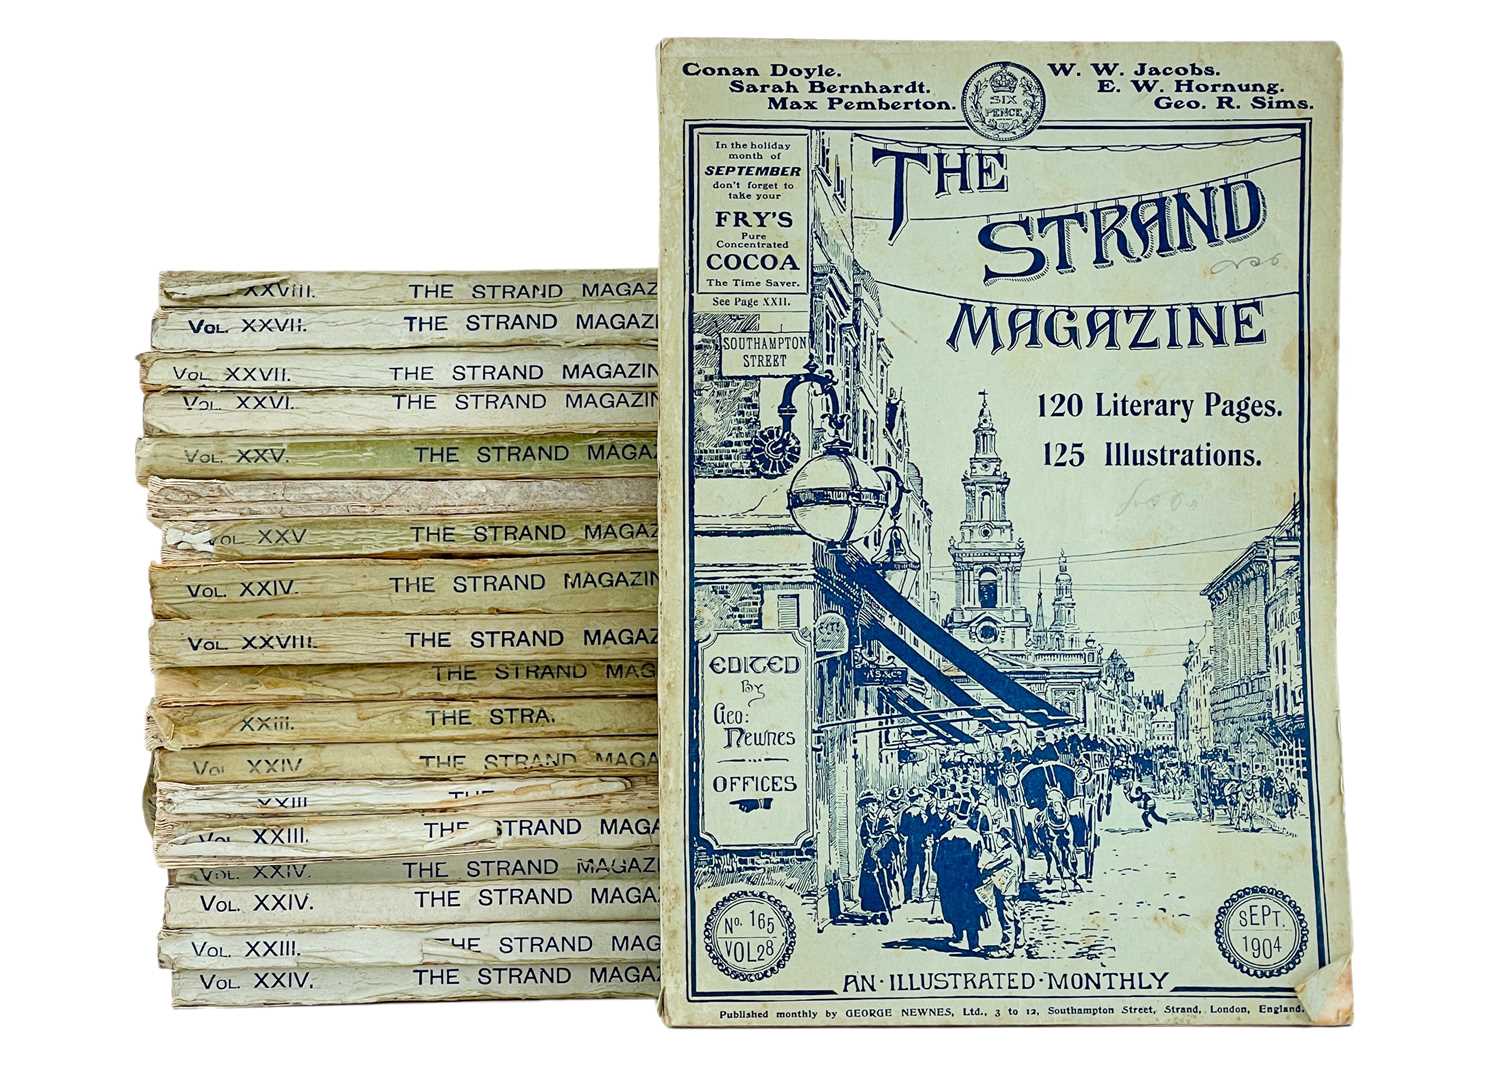 (Arthur Conan Doyle contributor). 'The Strand Magazine' Assorted issues in original parts